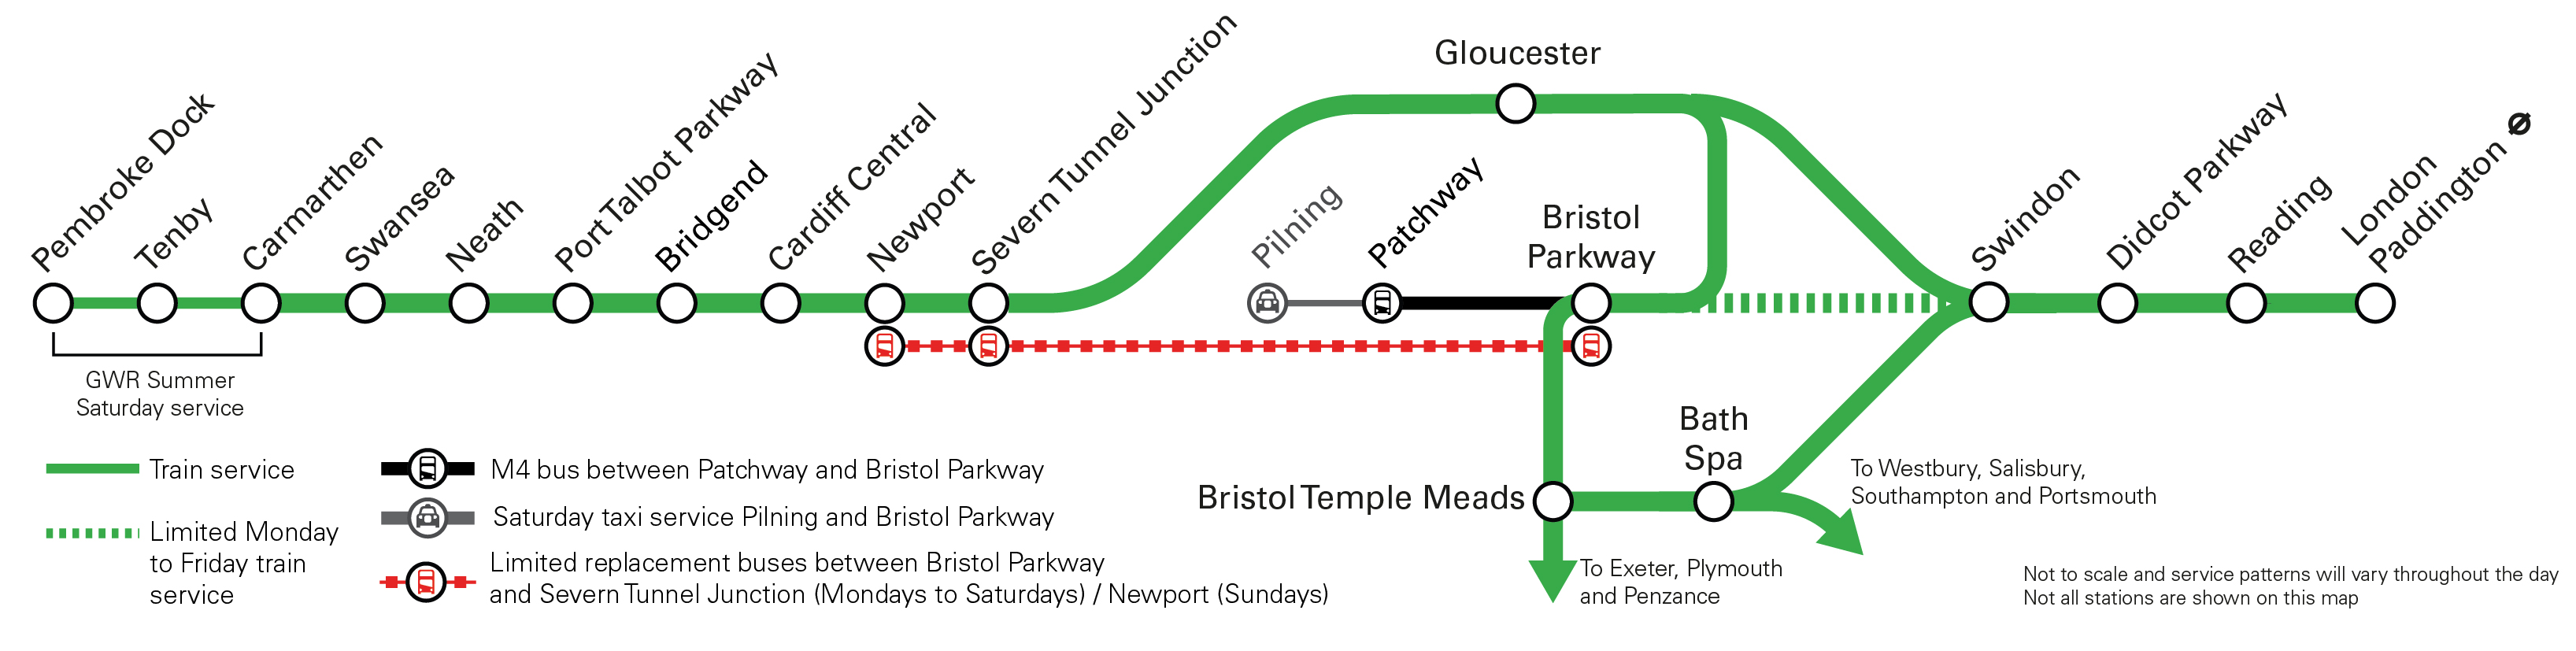 Map of travel disruption from Bristol to South Wales from Wednesday 3 to Thursday 18 July plus weekend of 27 and 28 July. Full detail is available in text form on this page.